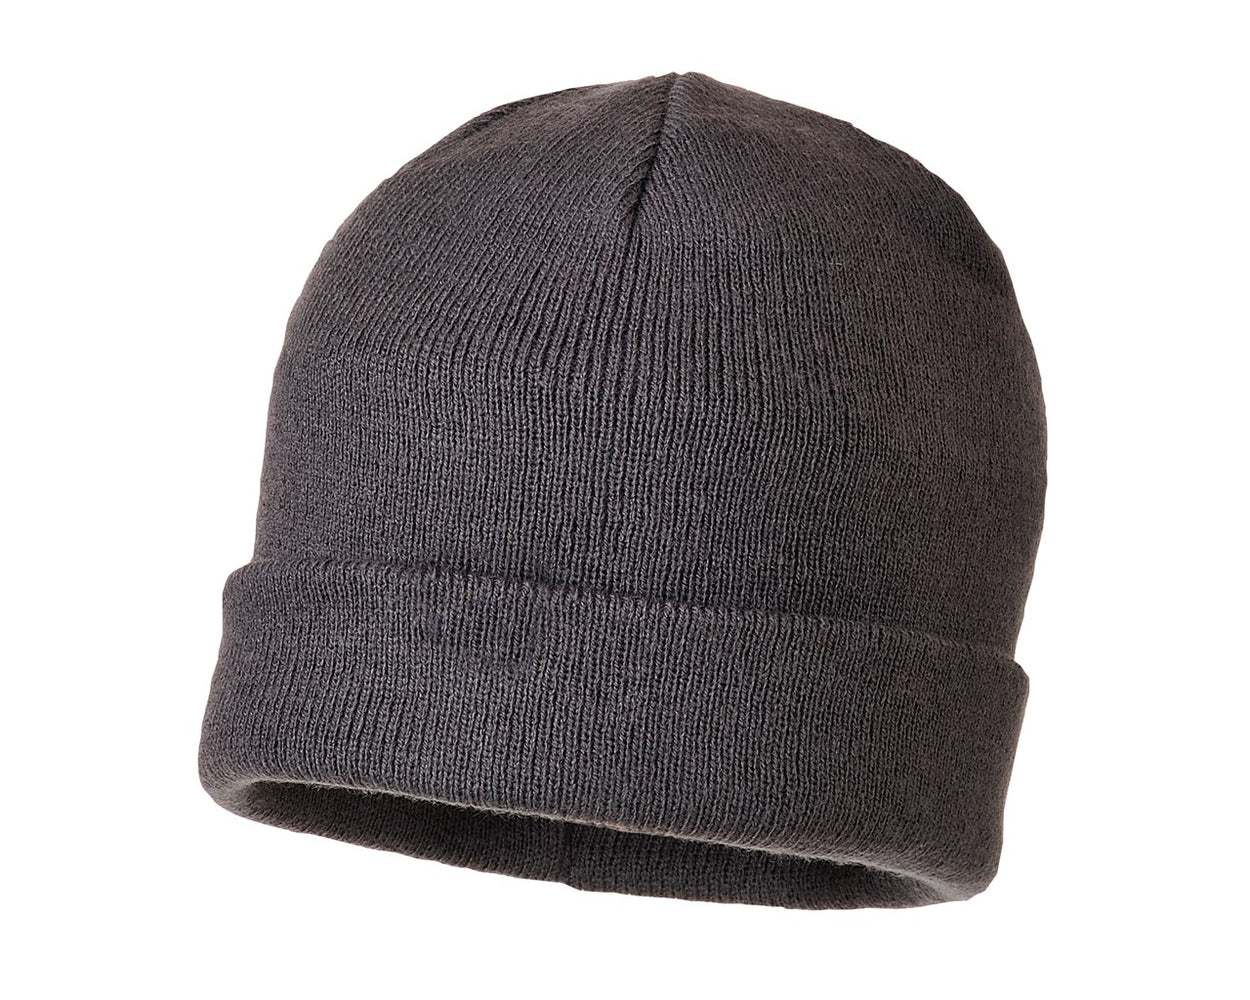 Knit Hat Insulatex Lined Grey BO13GY (SINGLE OR MULTI-PACK)